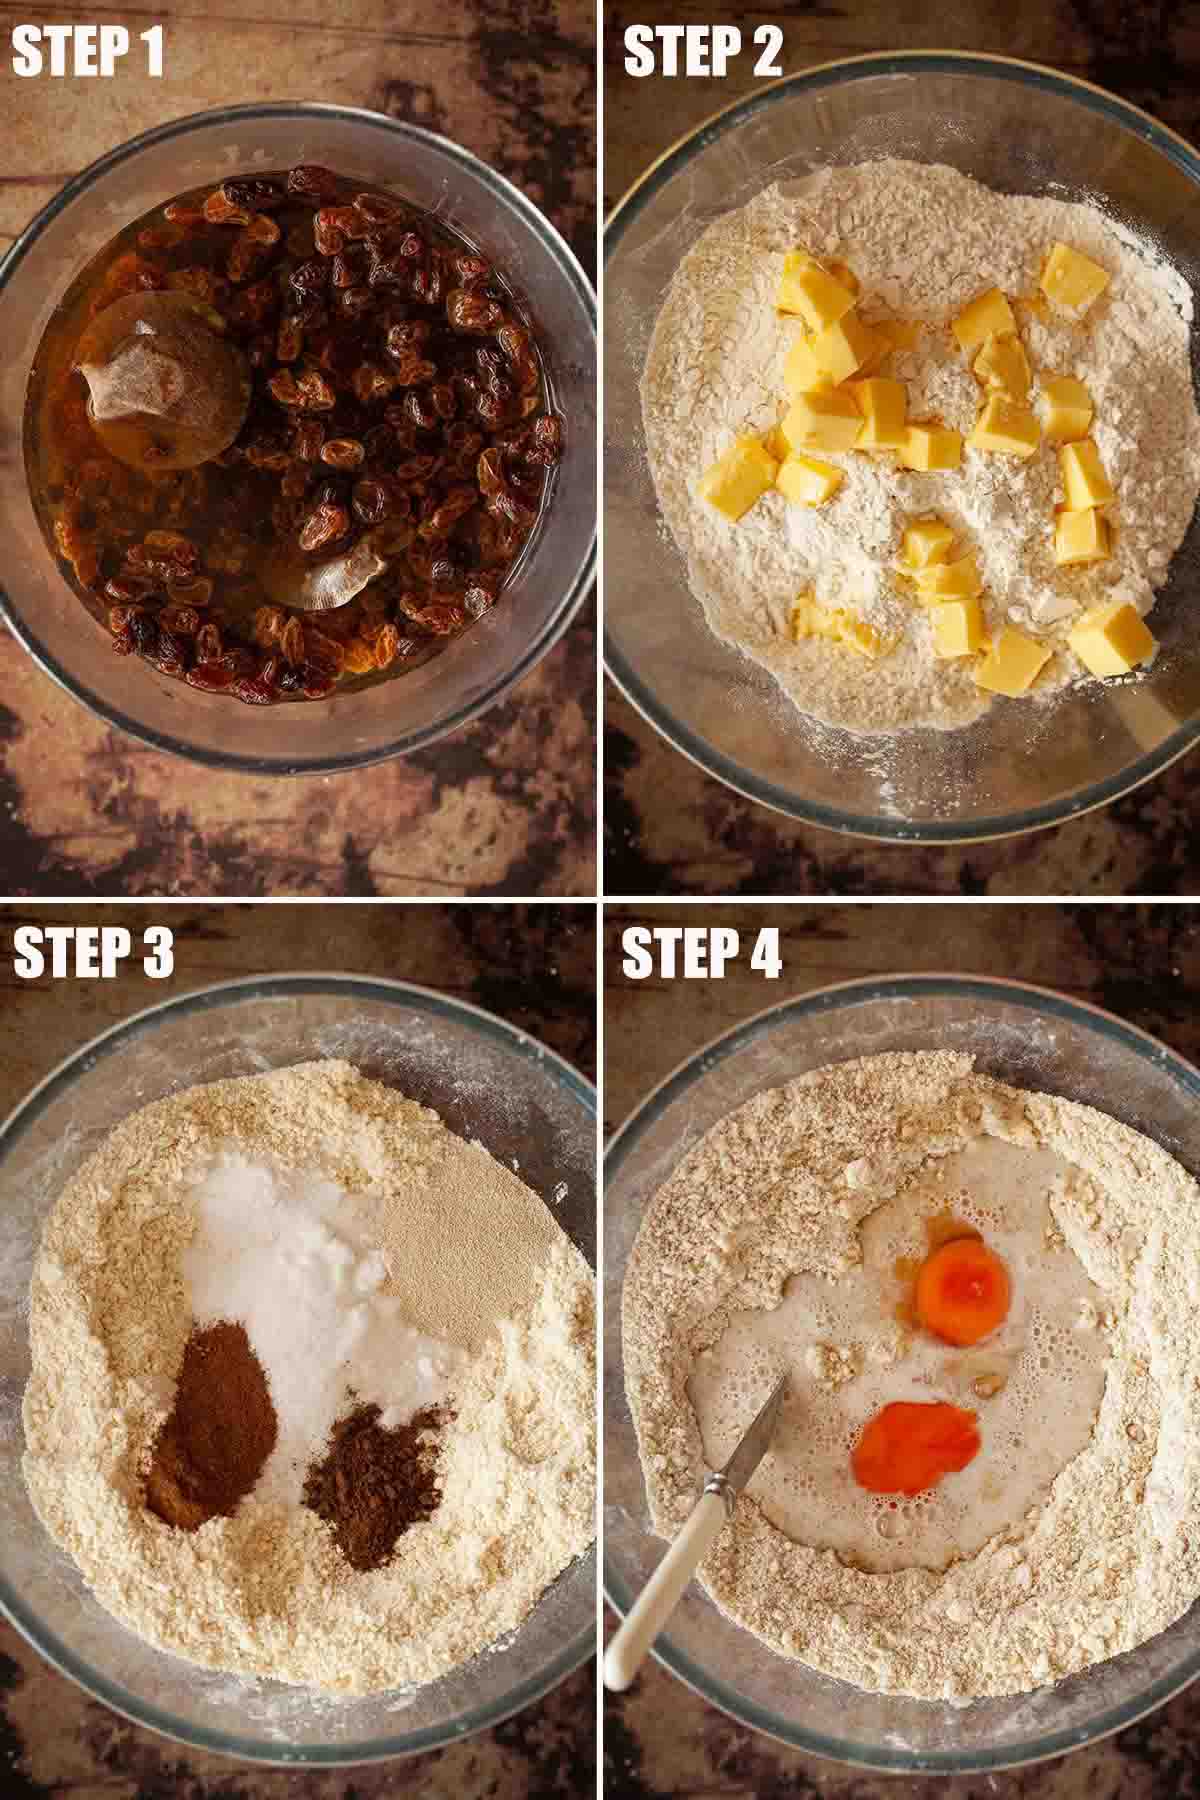 Collage of images showing a dried fruit loaf being made.